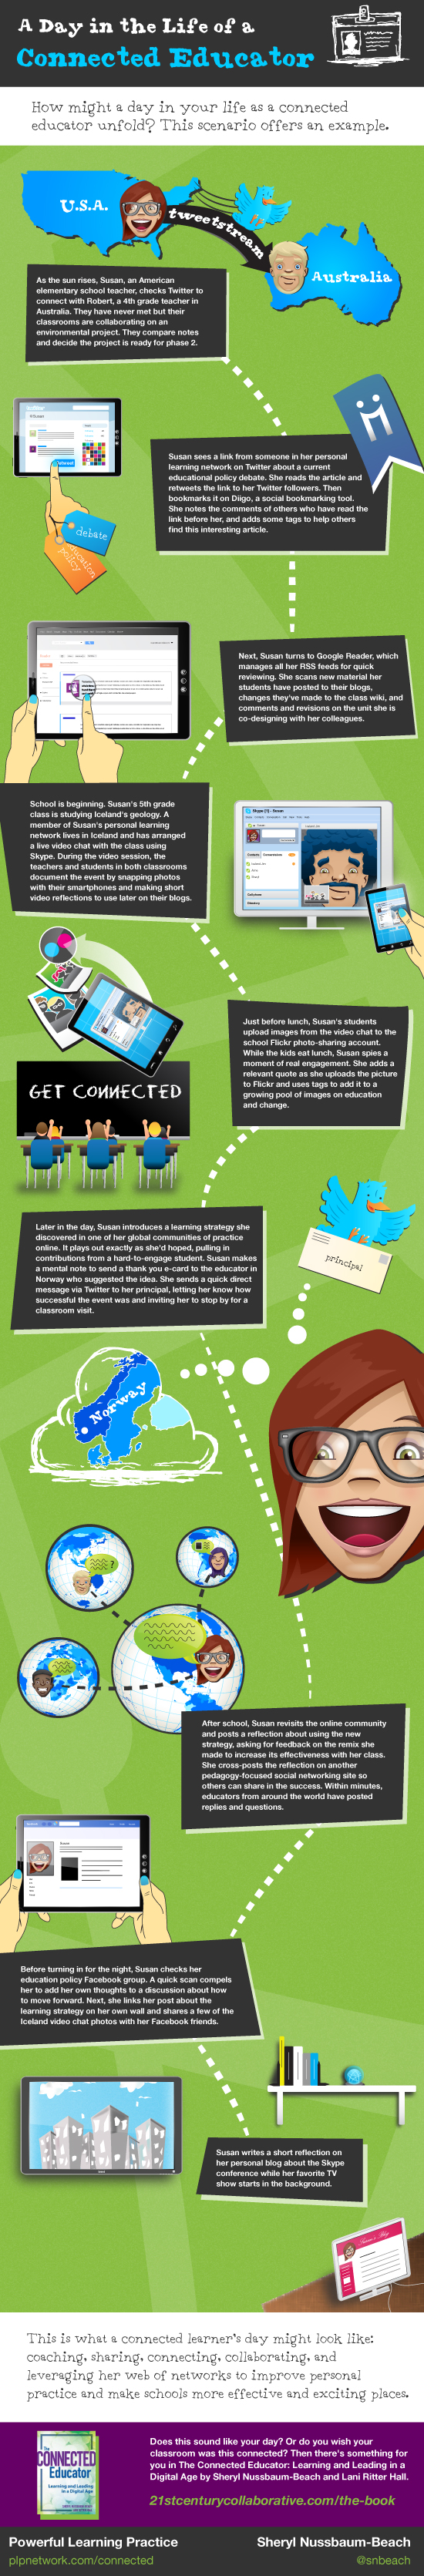 Infographic showing a day in the life of a connected educator - teachers using social media